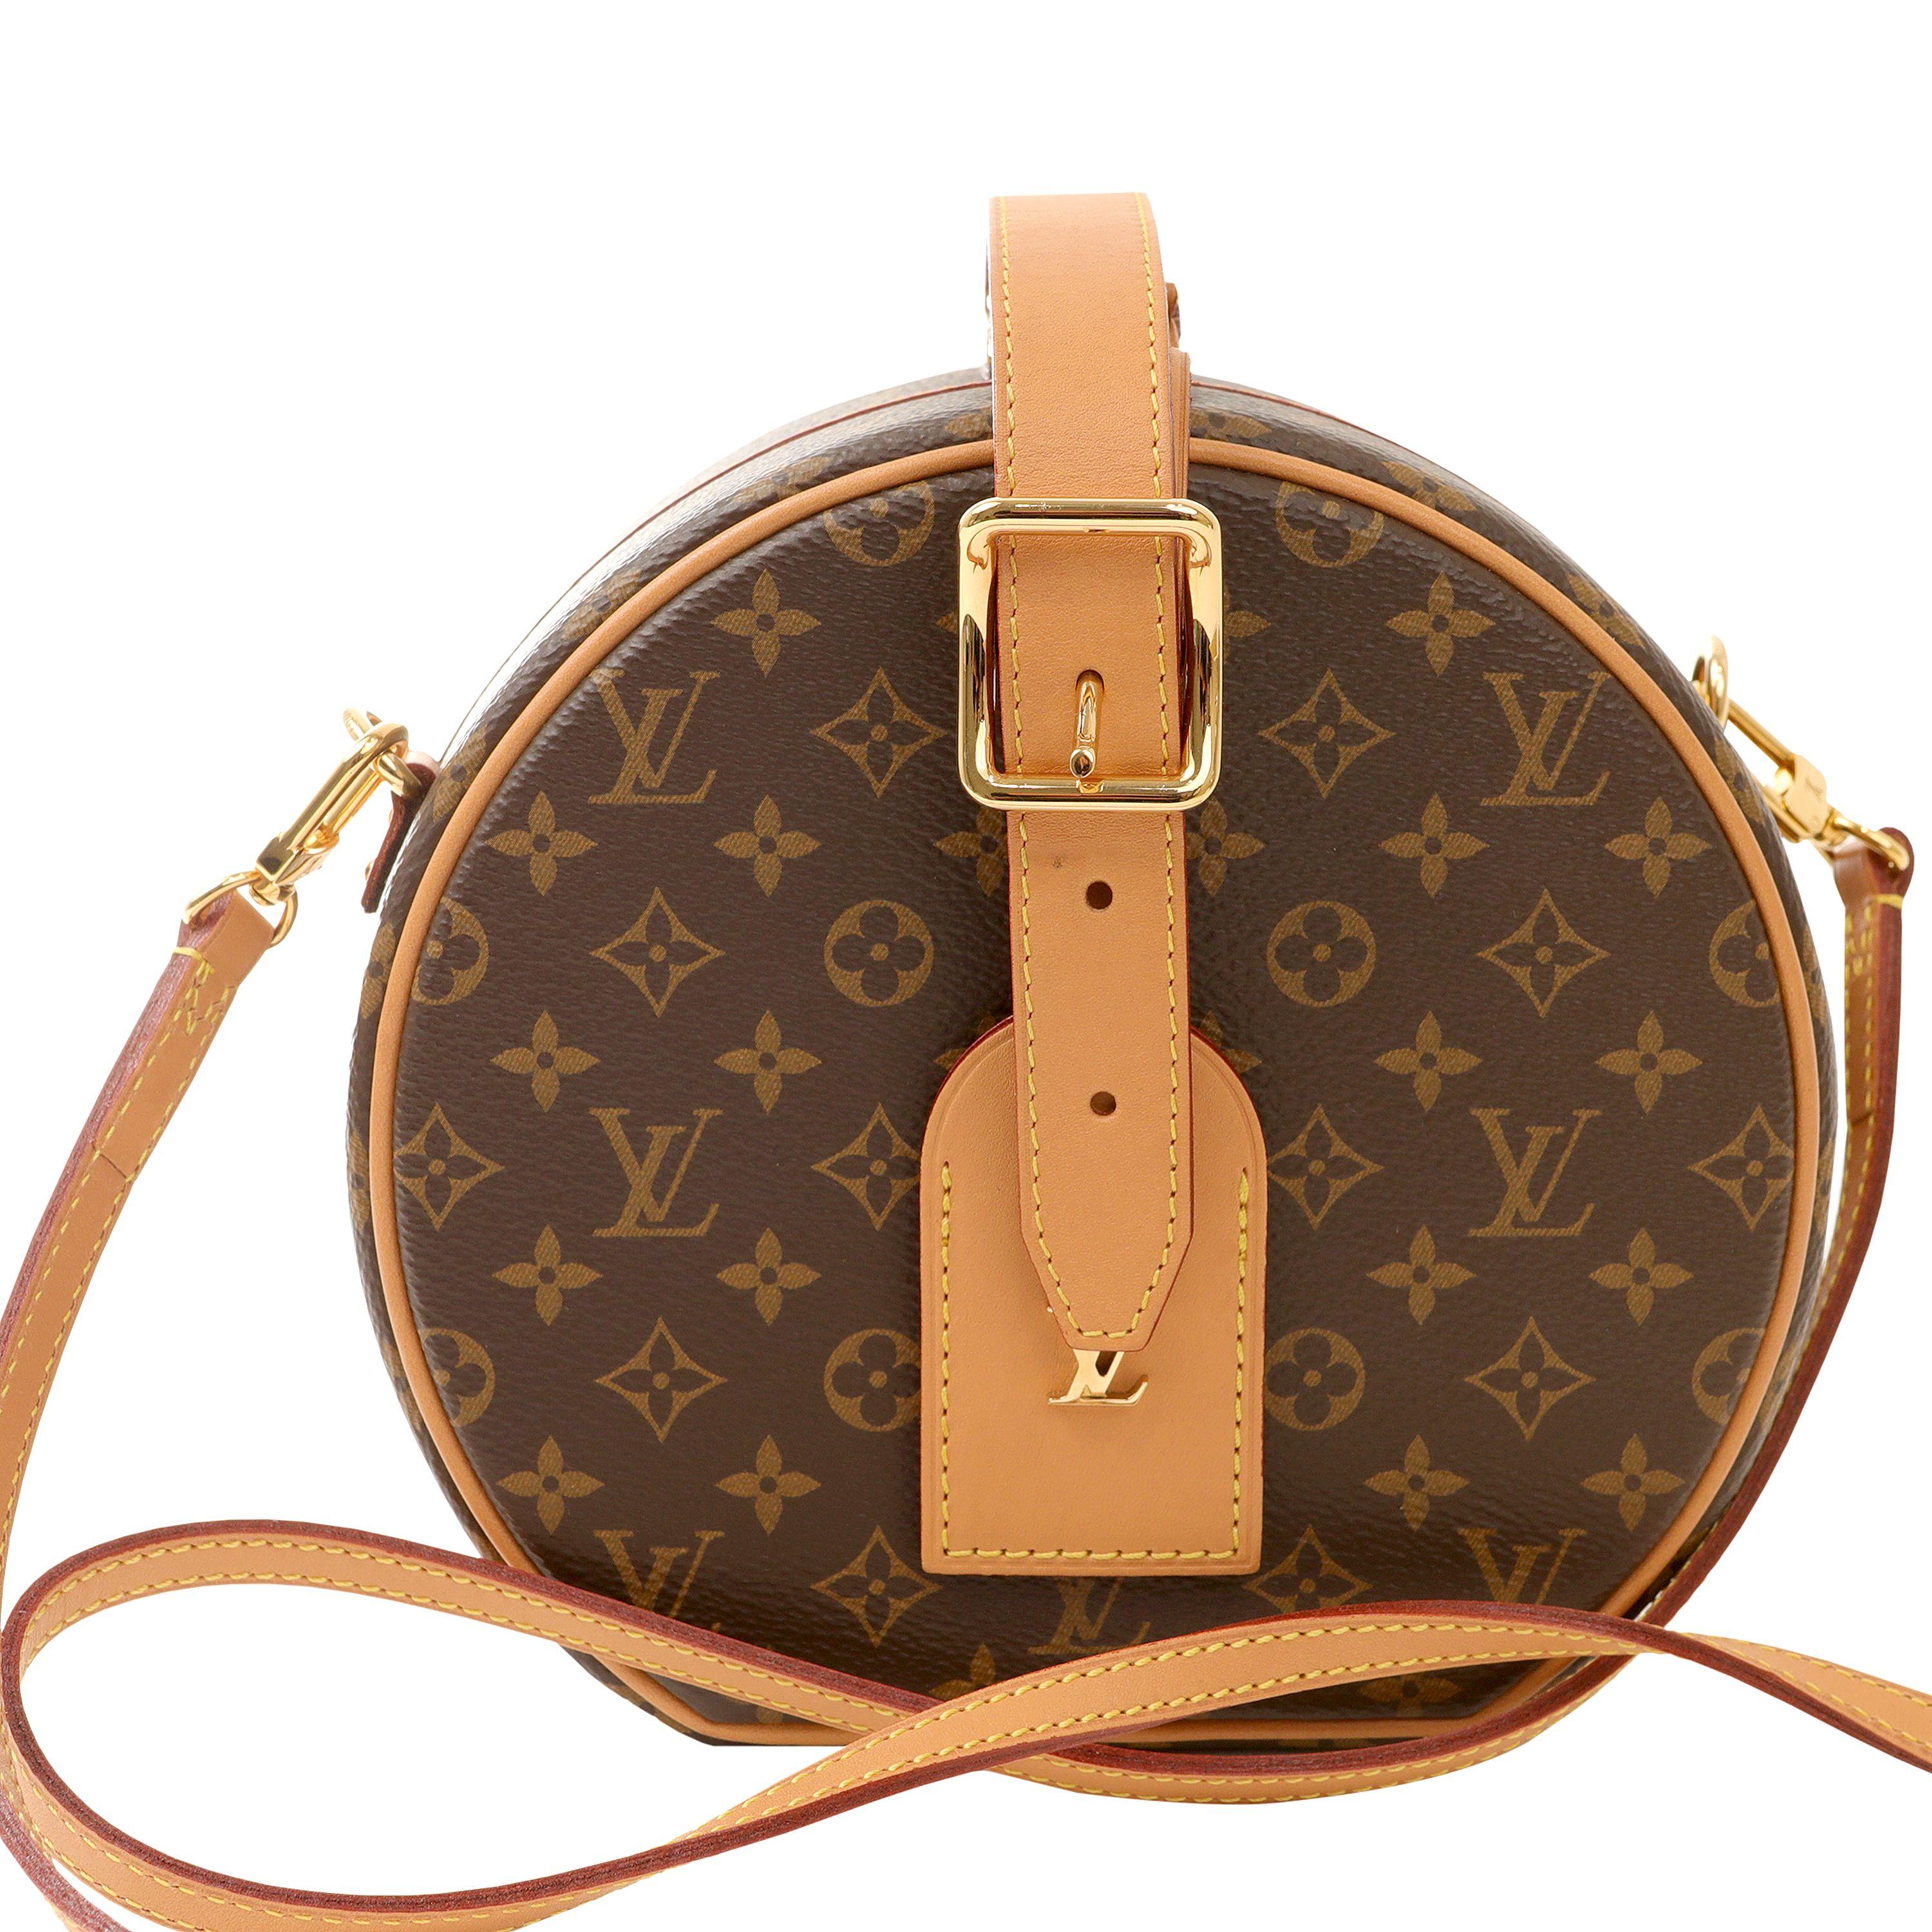 This authentic Louis Vuitton Monogram Petite Boite Chapeau Crossbody Bag is pristine, appearing never before carried.  Highly desirable mini style of the classic hard case “hat box” in a round silhouette.  Signature LV brown and tan coated canvas